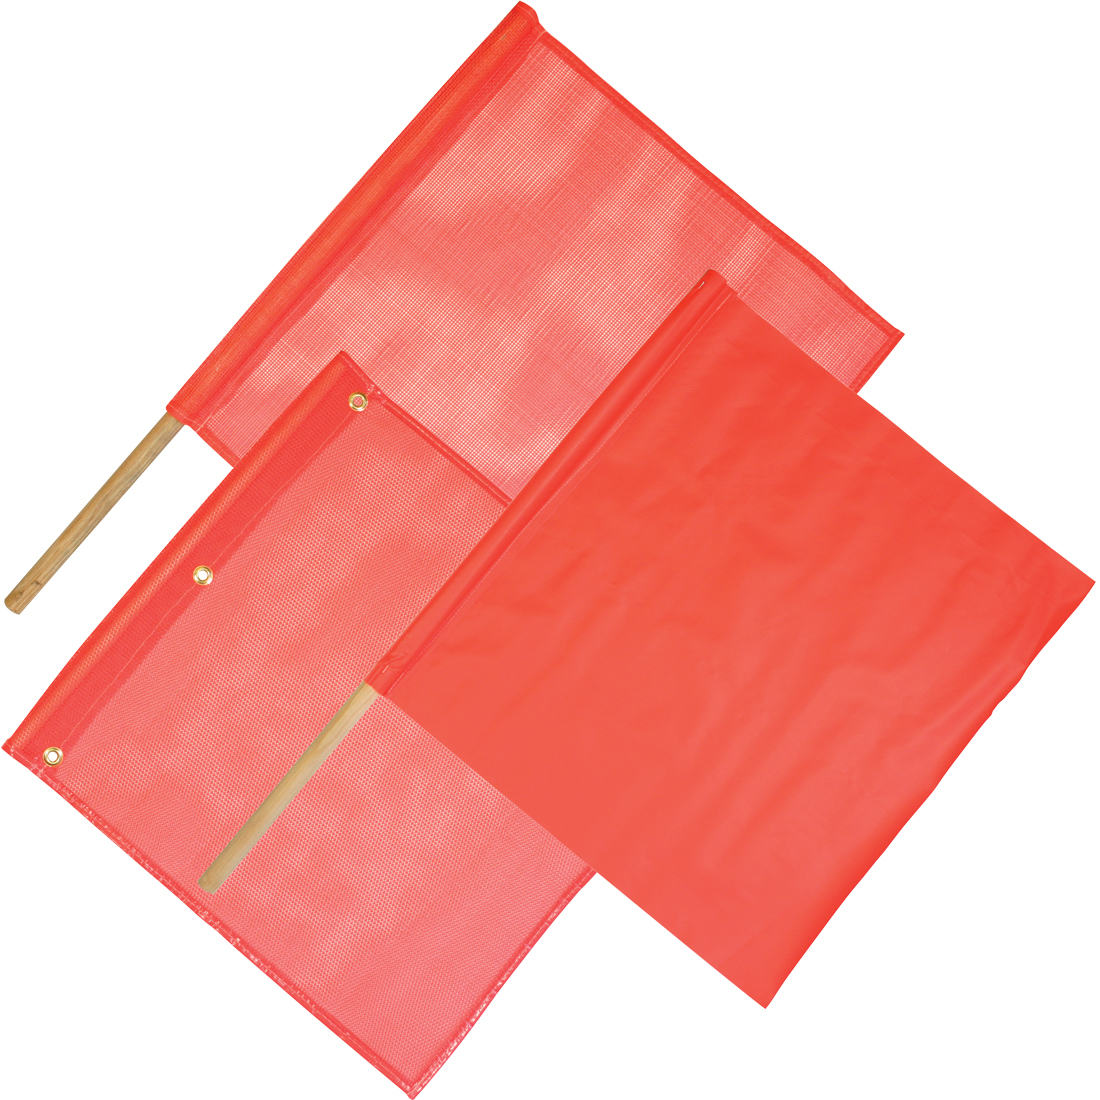 Nylon 18x18 Red Tricot Safety Flag lot of 3 